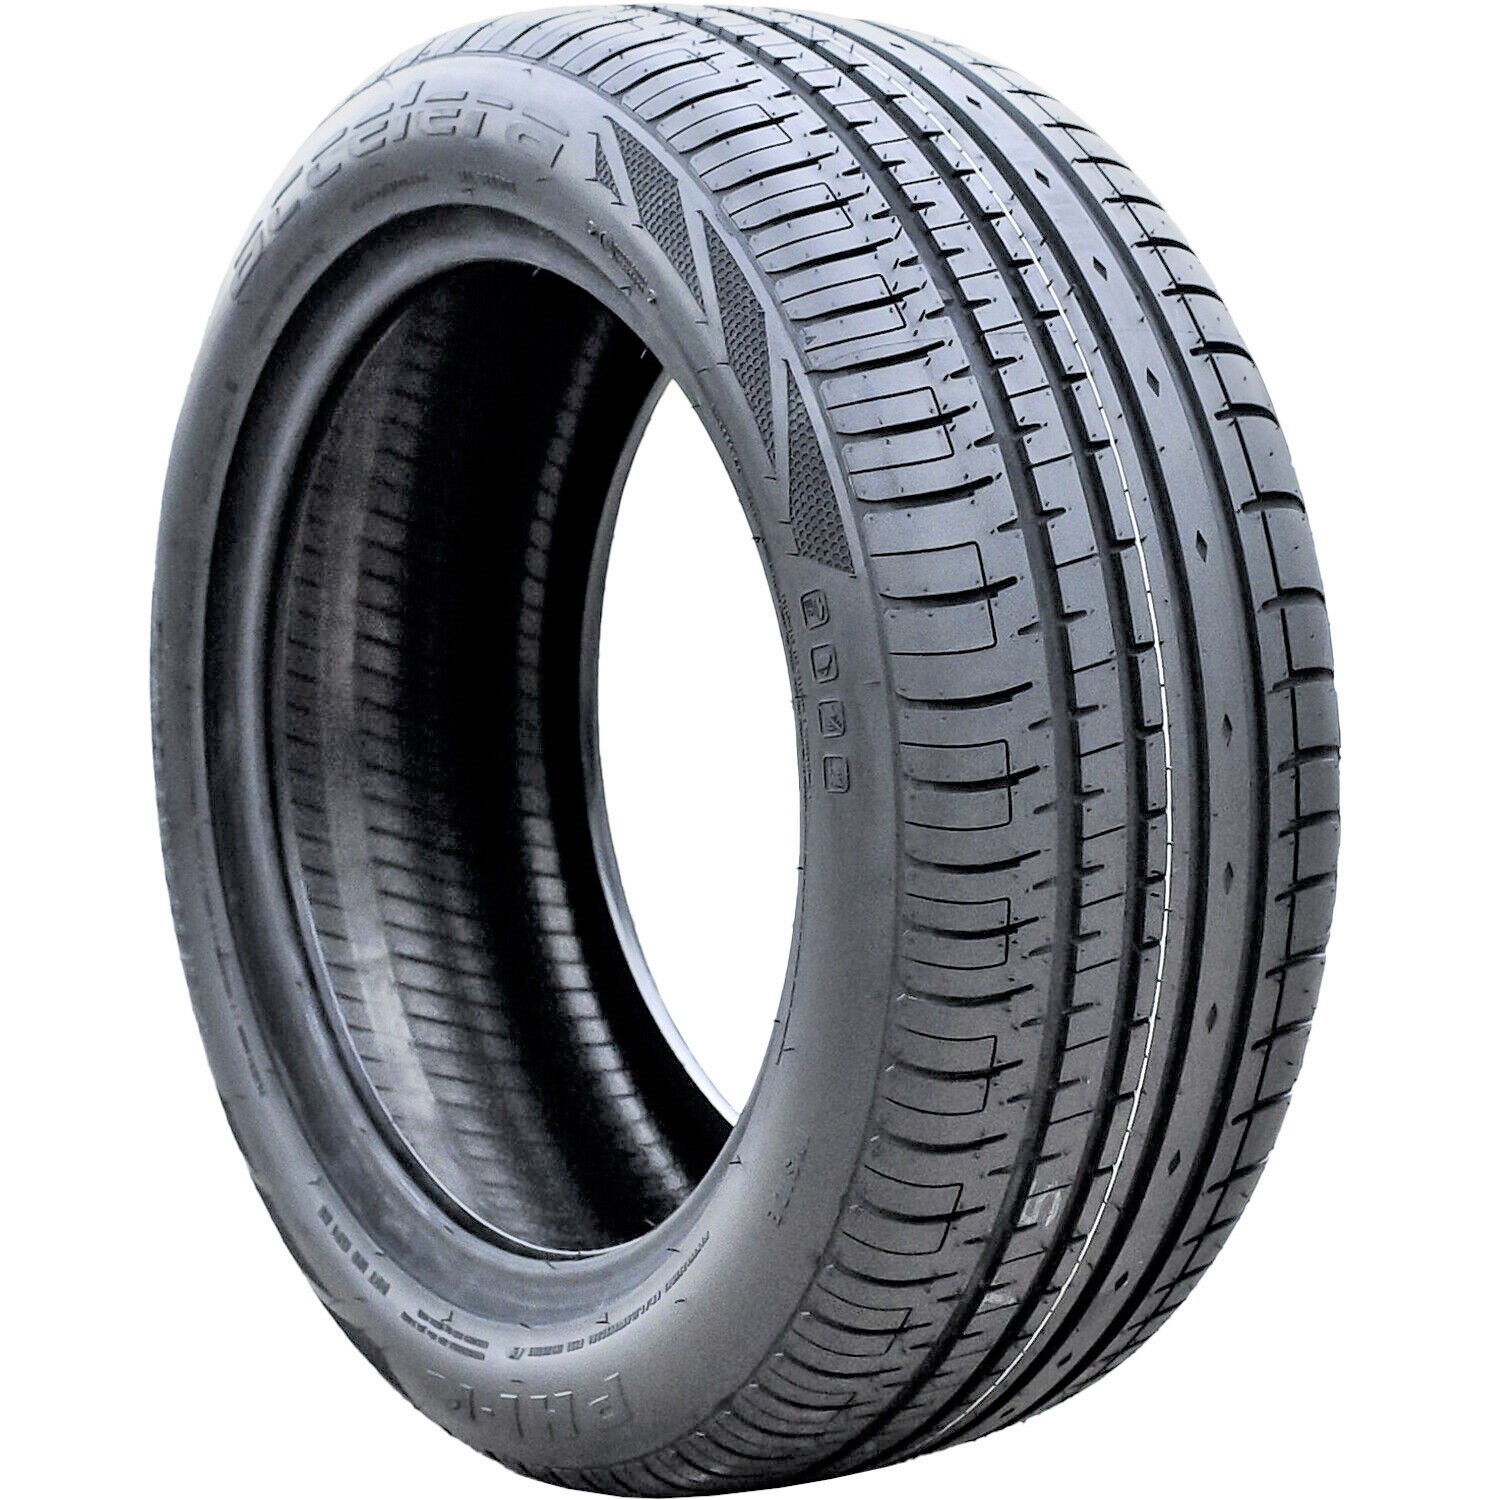 Accelera Phi-R 255/35R20 ZR 97Y XL A/S High Performance Tire - image 1 of 14